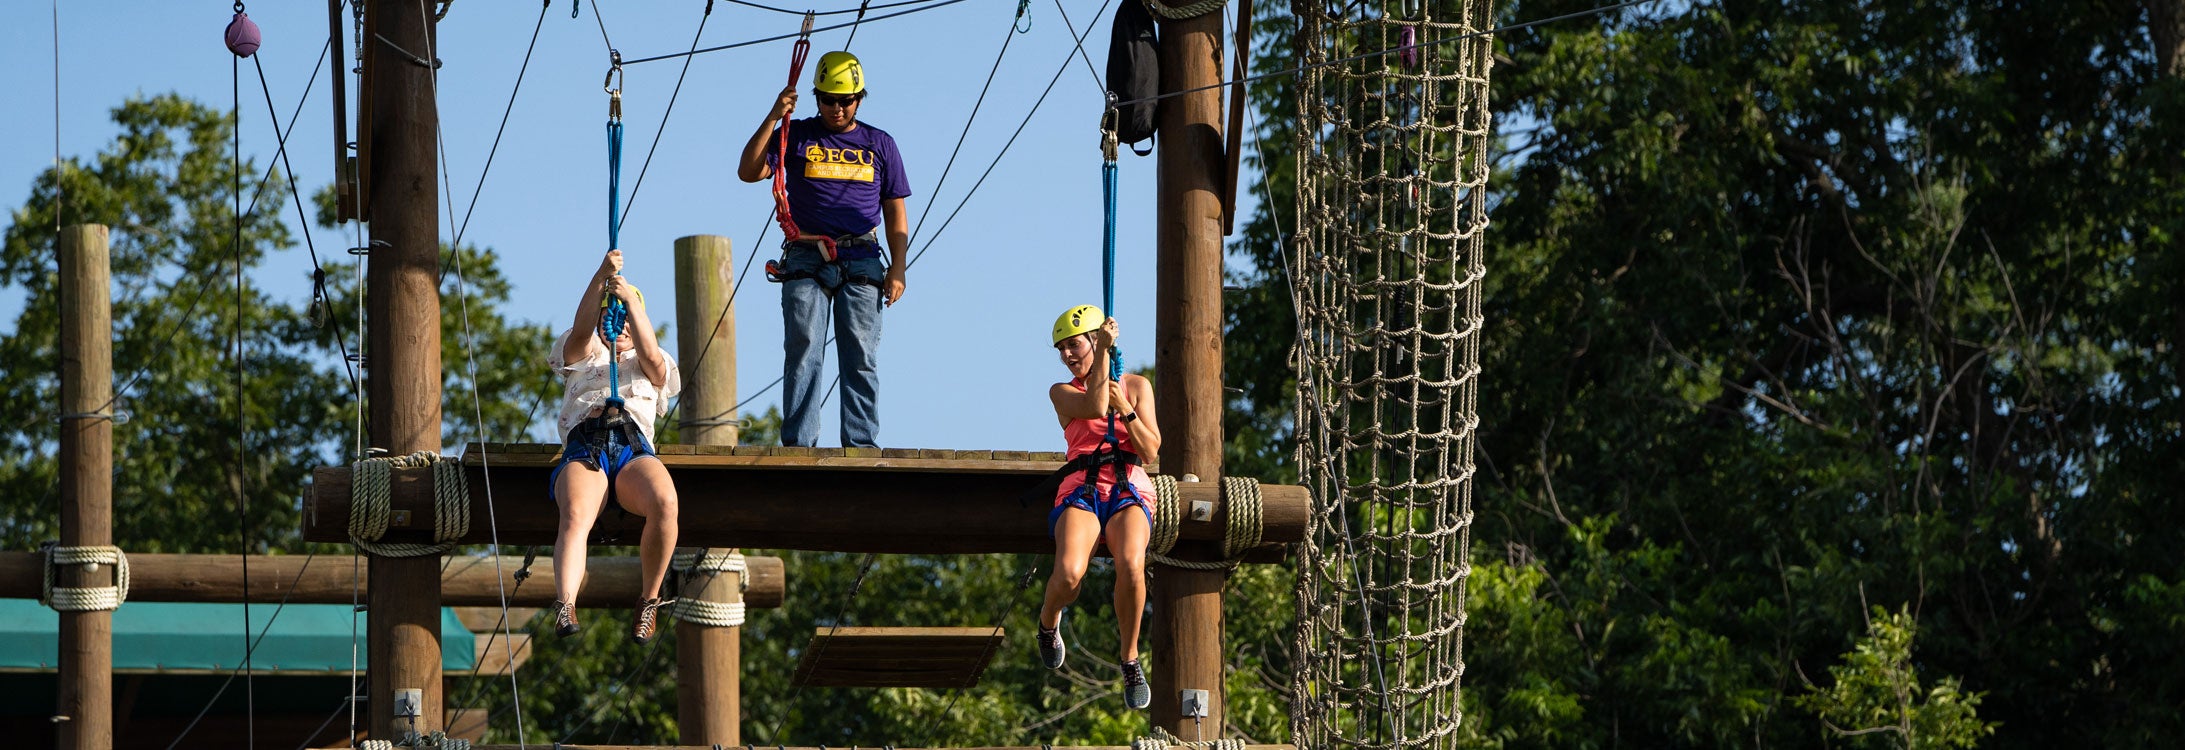 Ropes course at the recreation complex